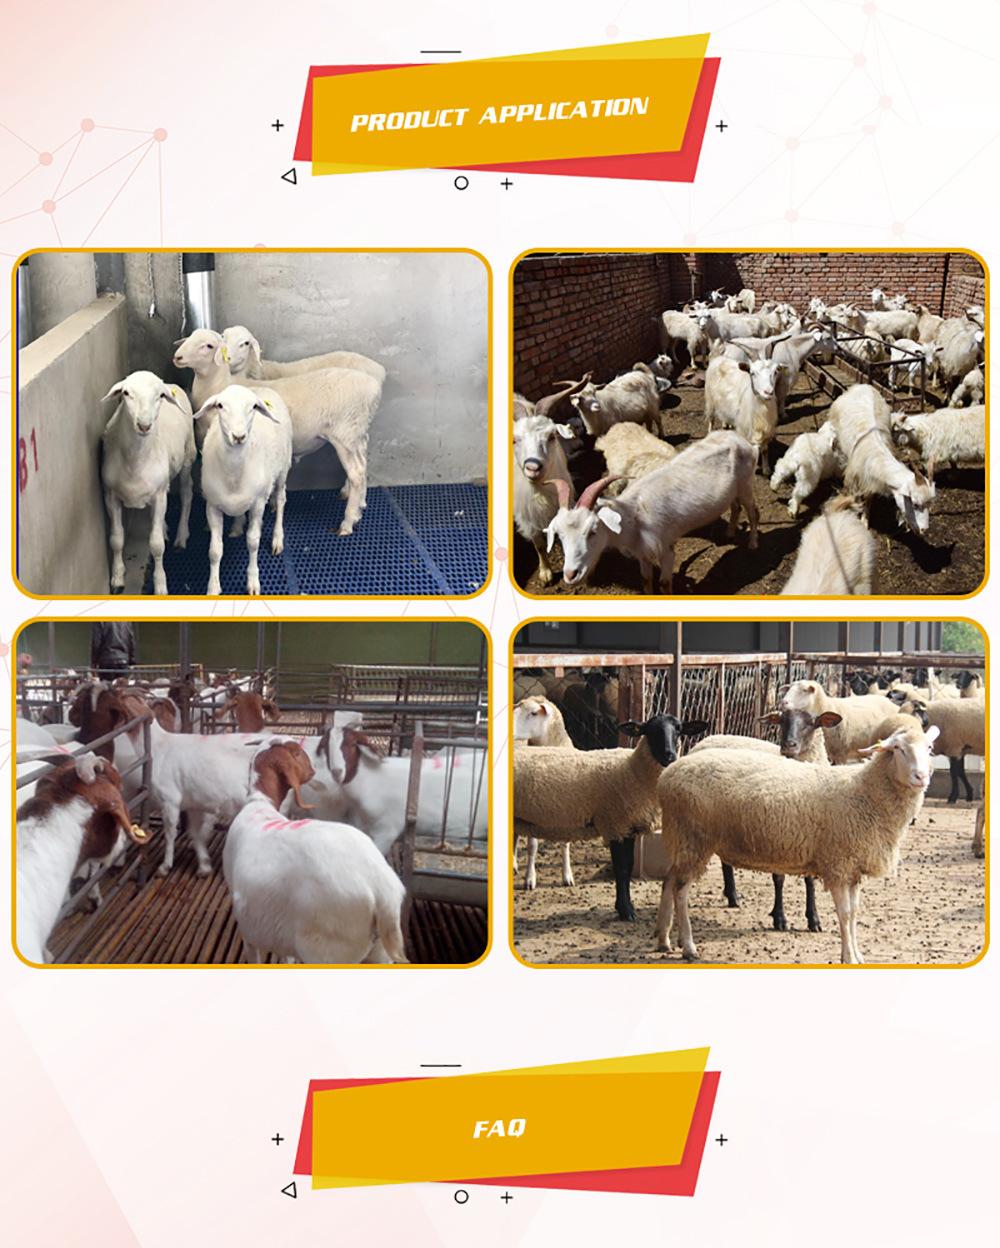 China-Made Agricultural Equipment Hot-DIP Galvanized Fence, Yard Fence, Cattle and Horse Fence, Panel Sheep Fence